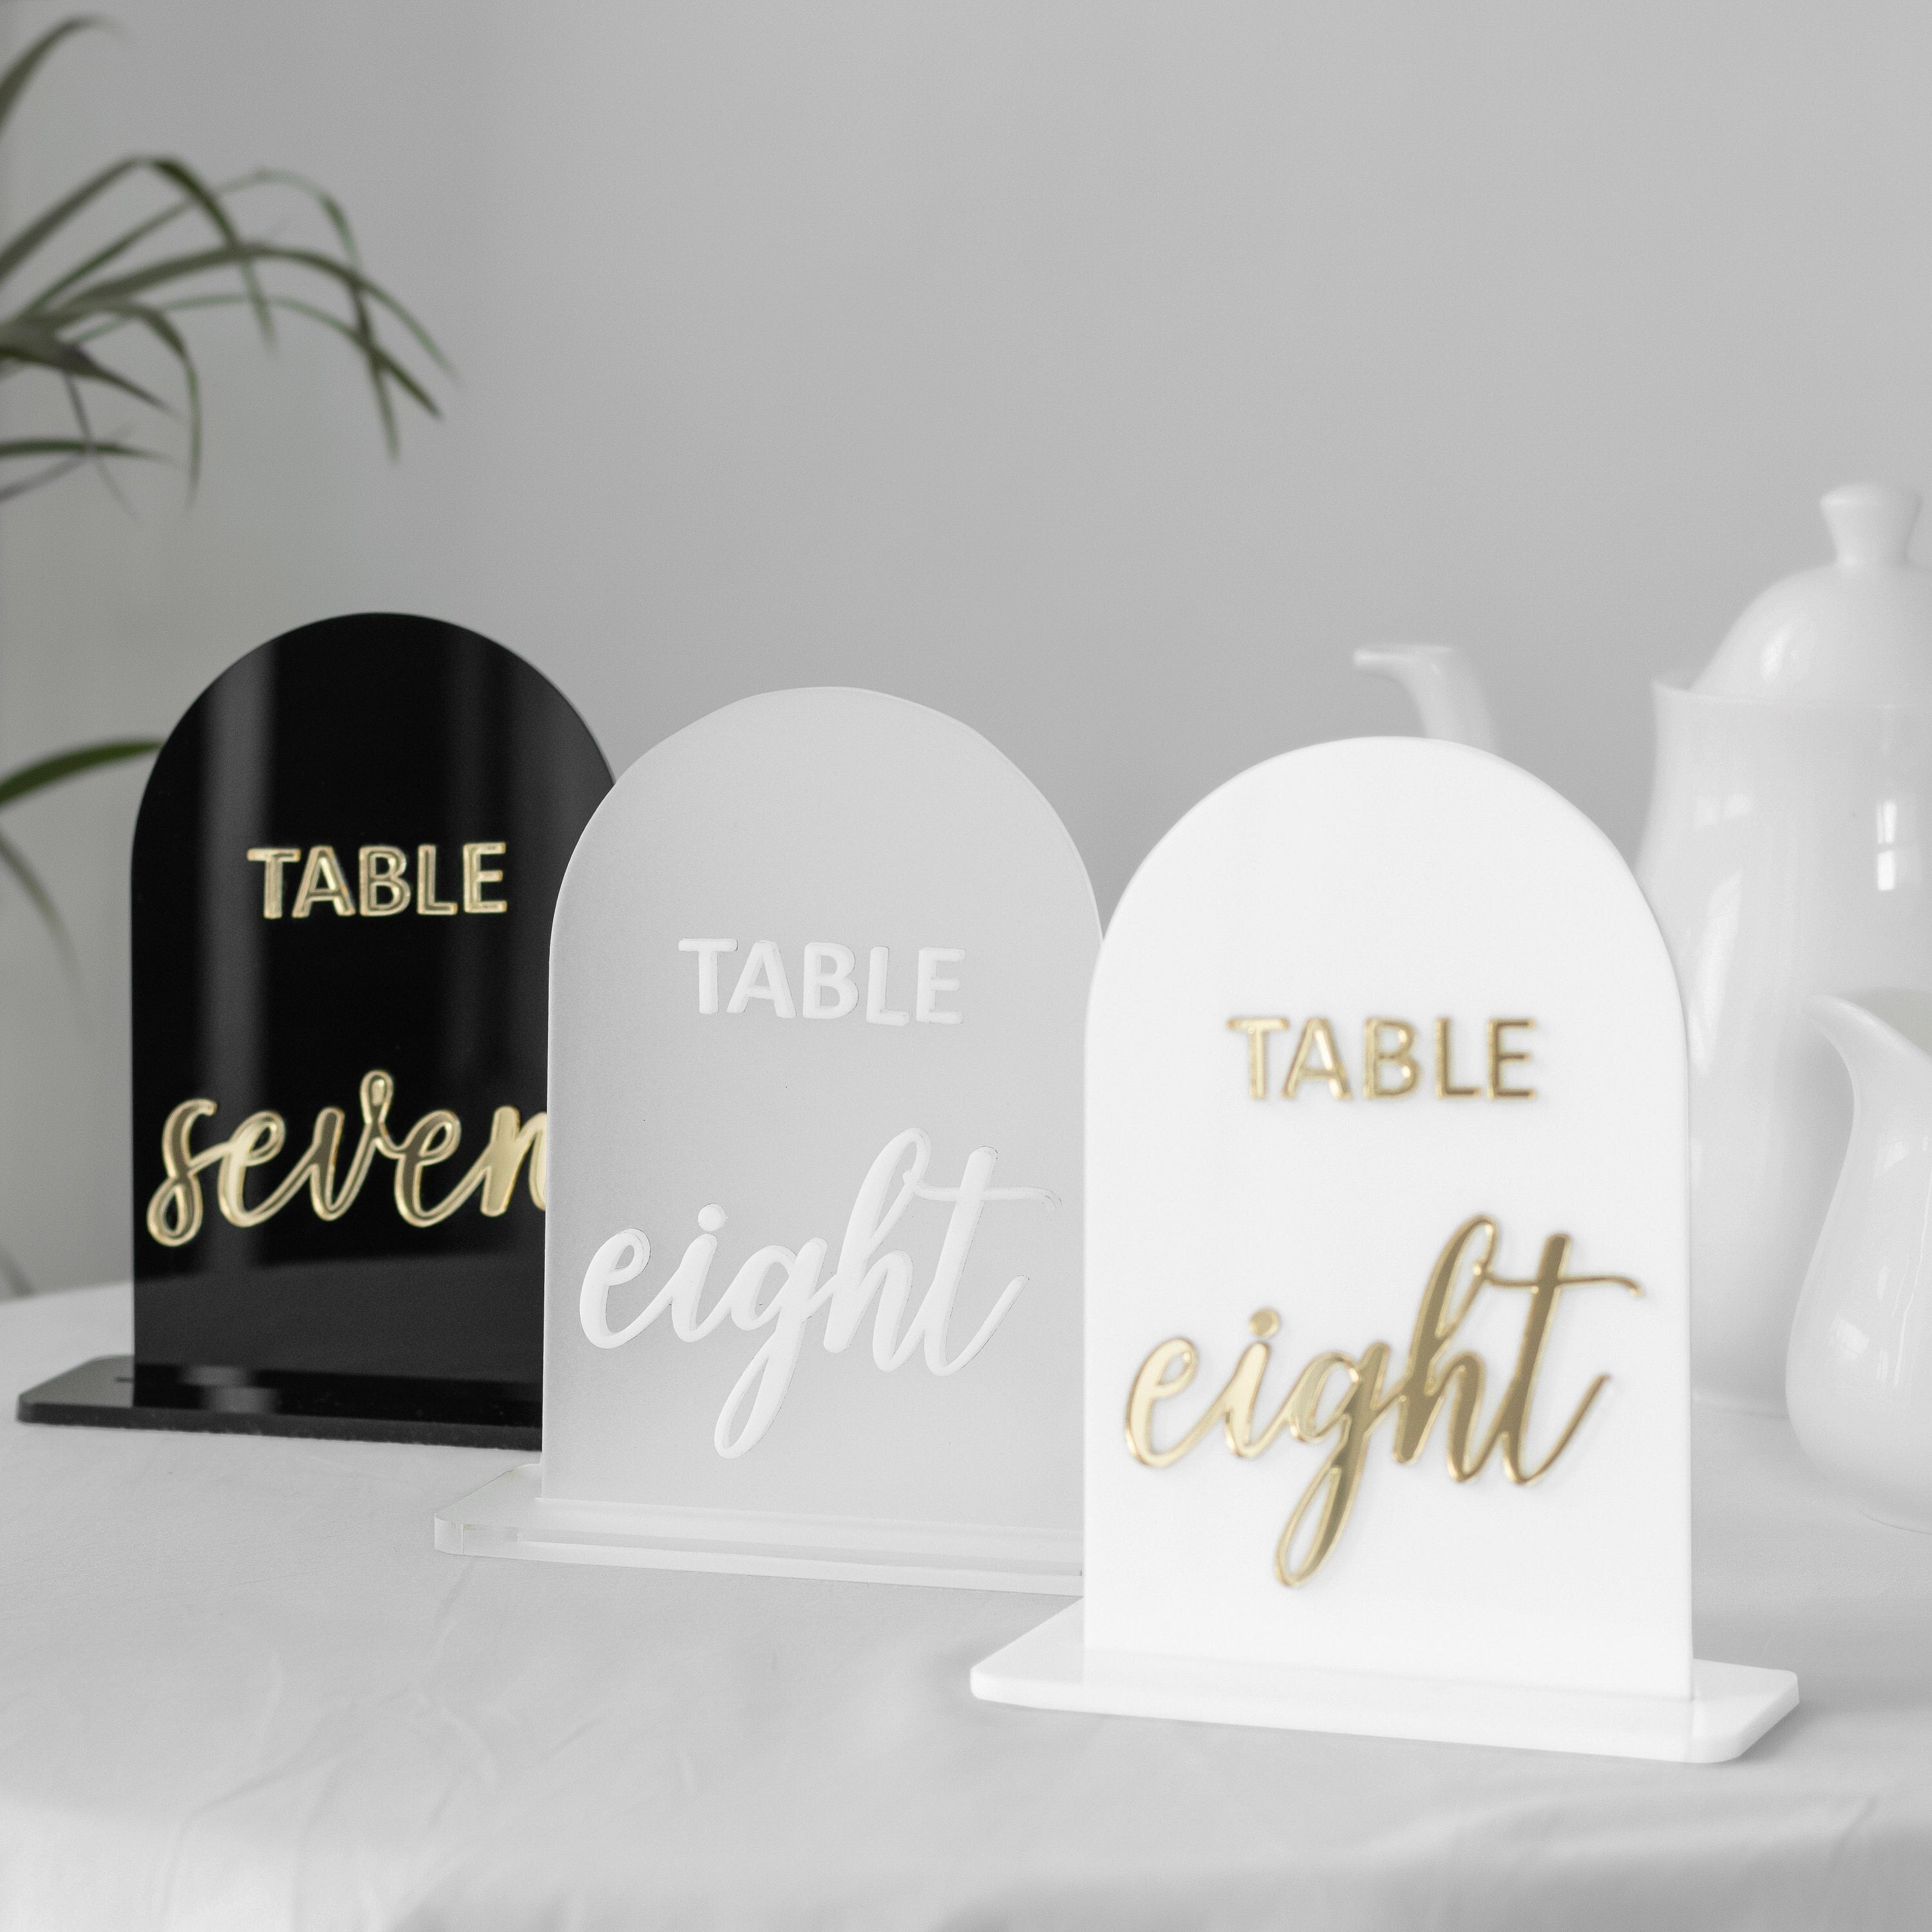 Acrylic Table Numbers | Arch Table Numbers | Table Numbers | Table Number Wedding , Centerpieces Luxury Decorations, Wedding Table Number